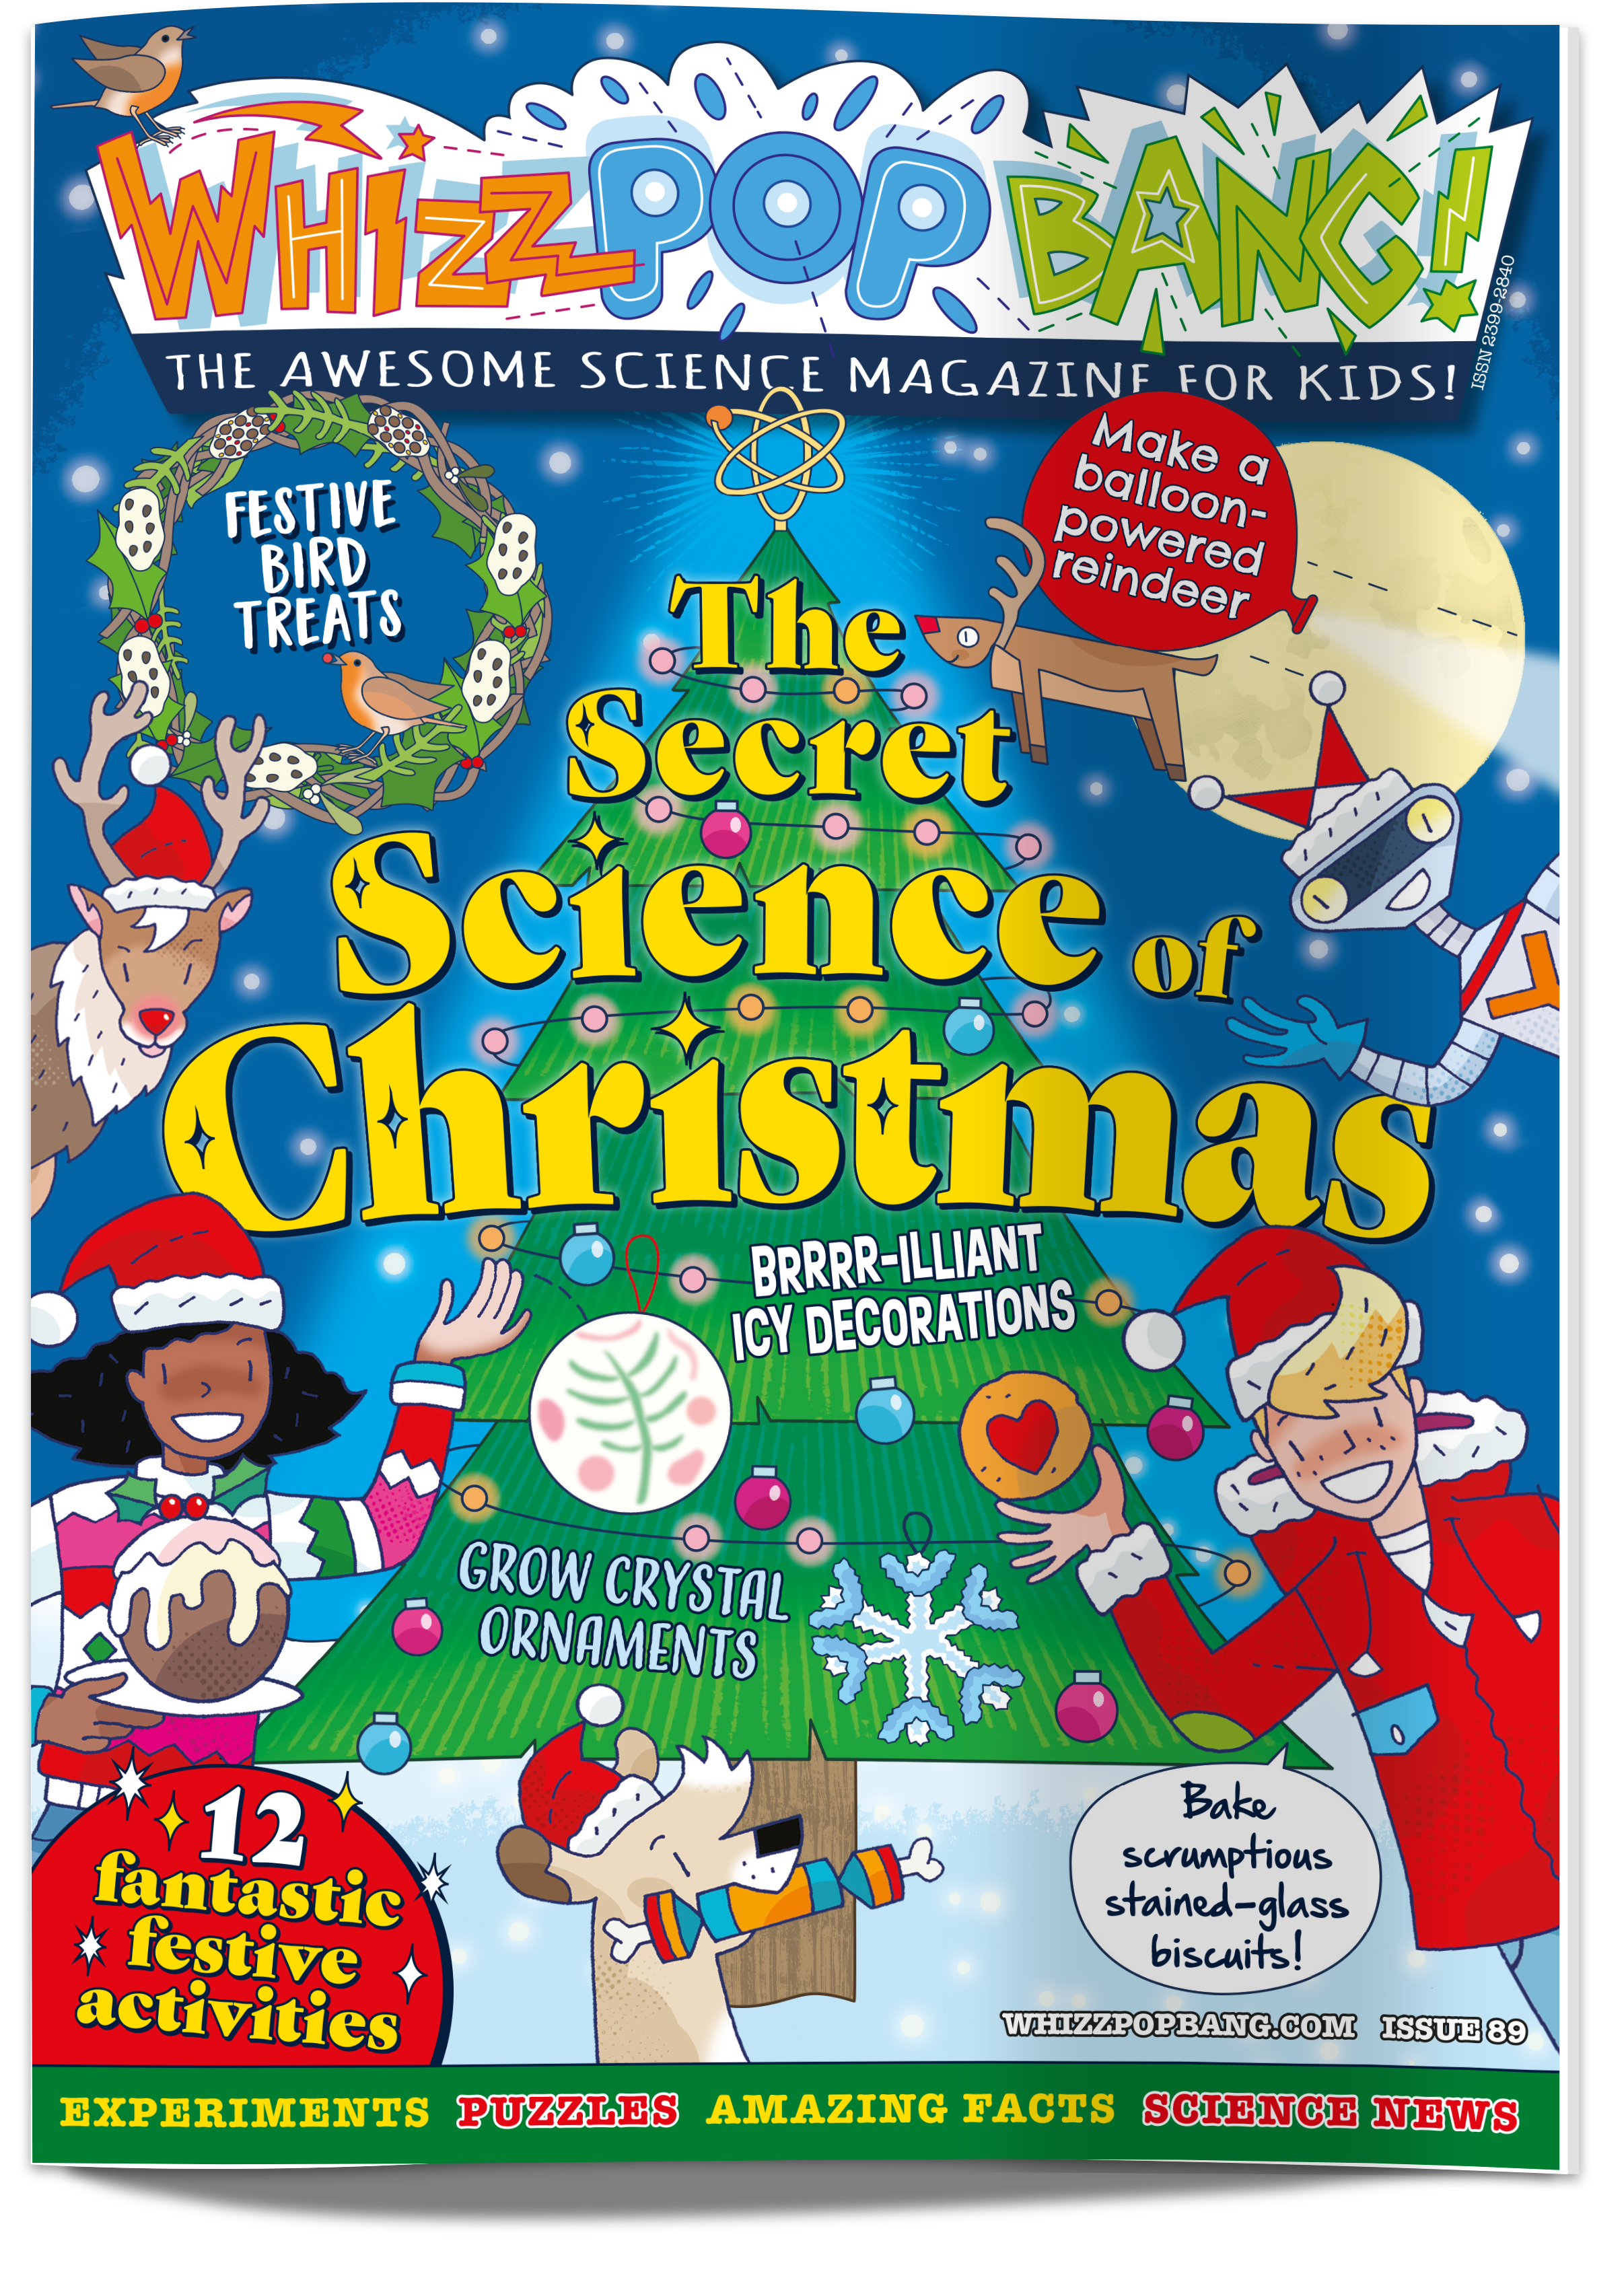 Whizz Pop Bang science magazine for kids